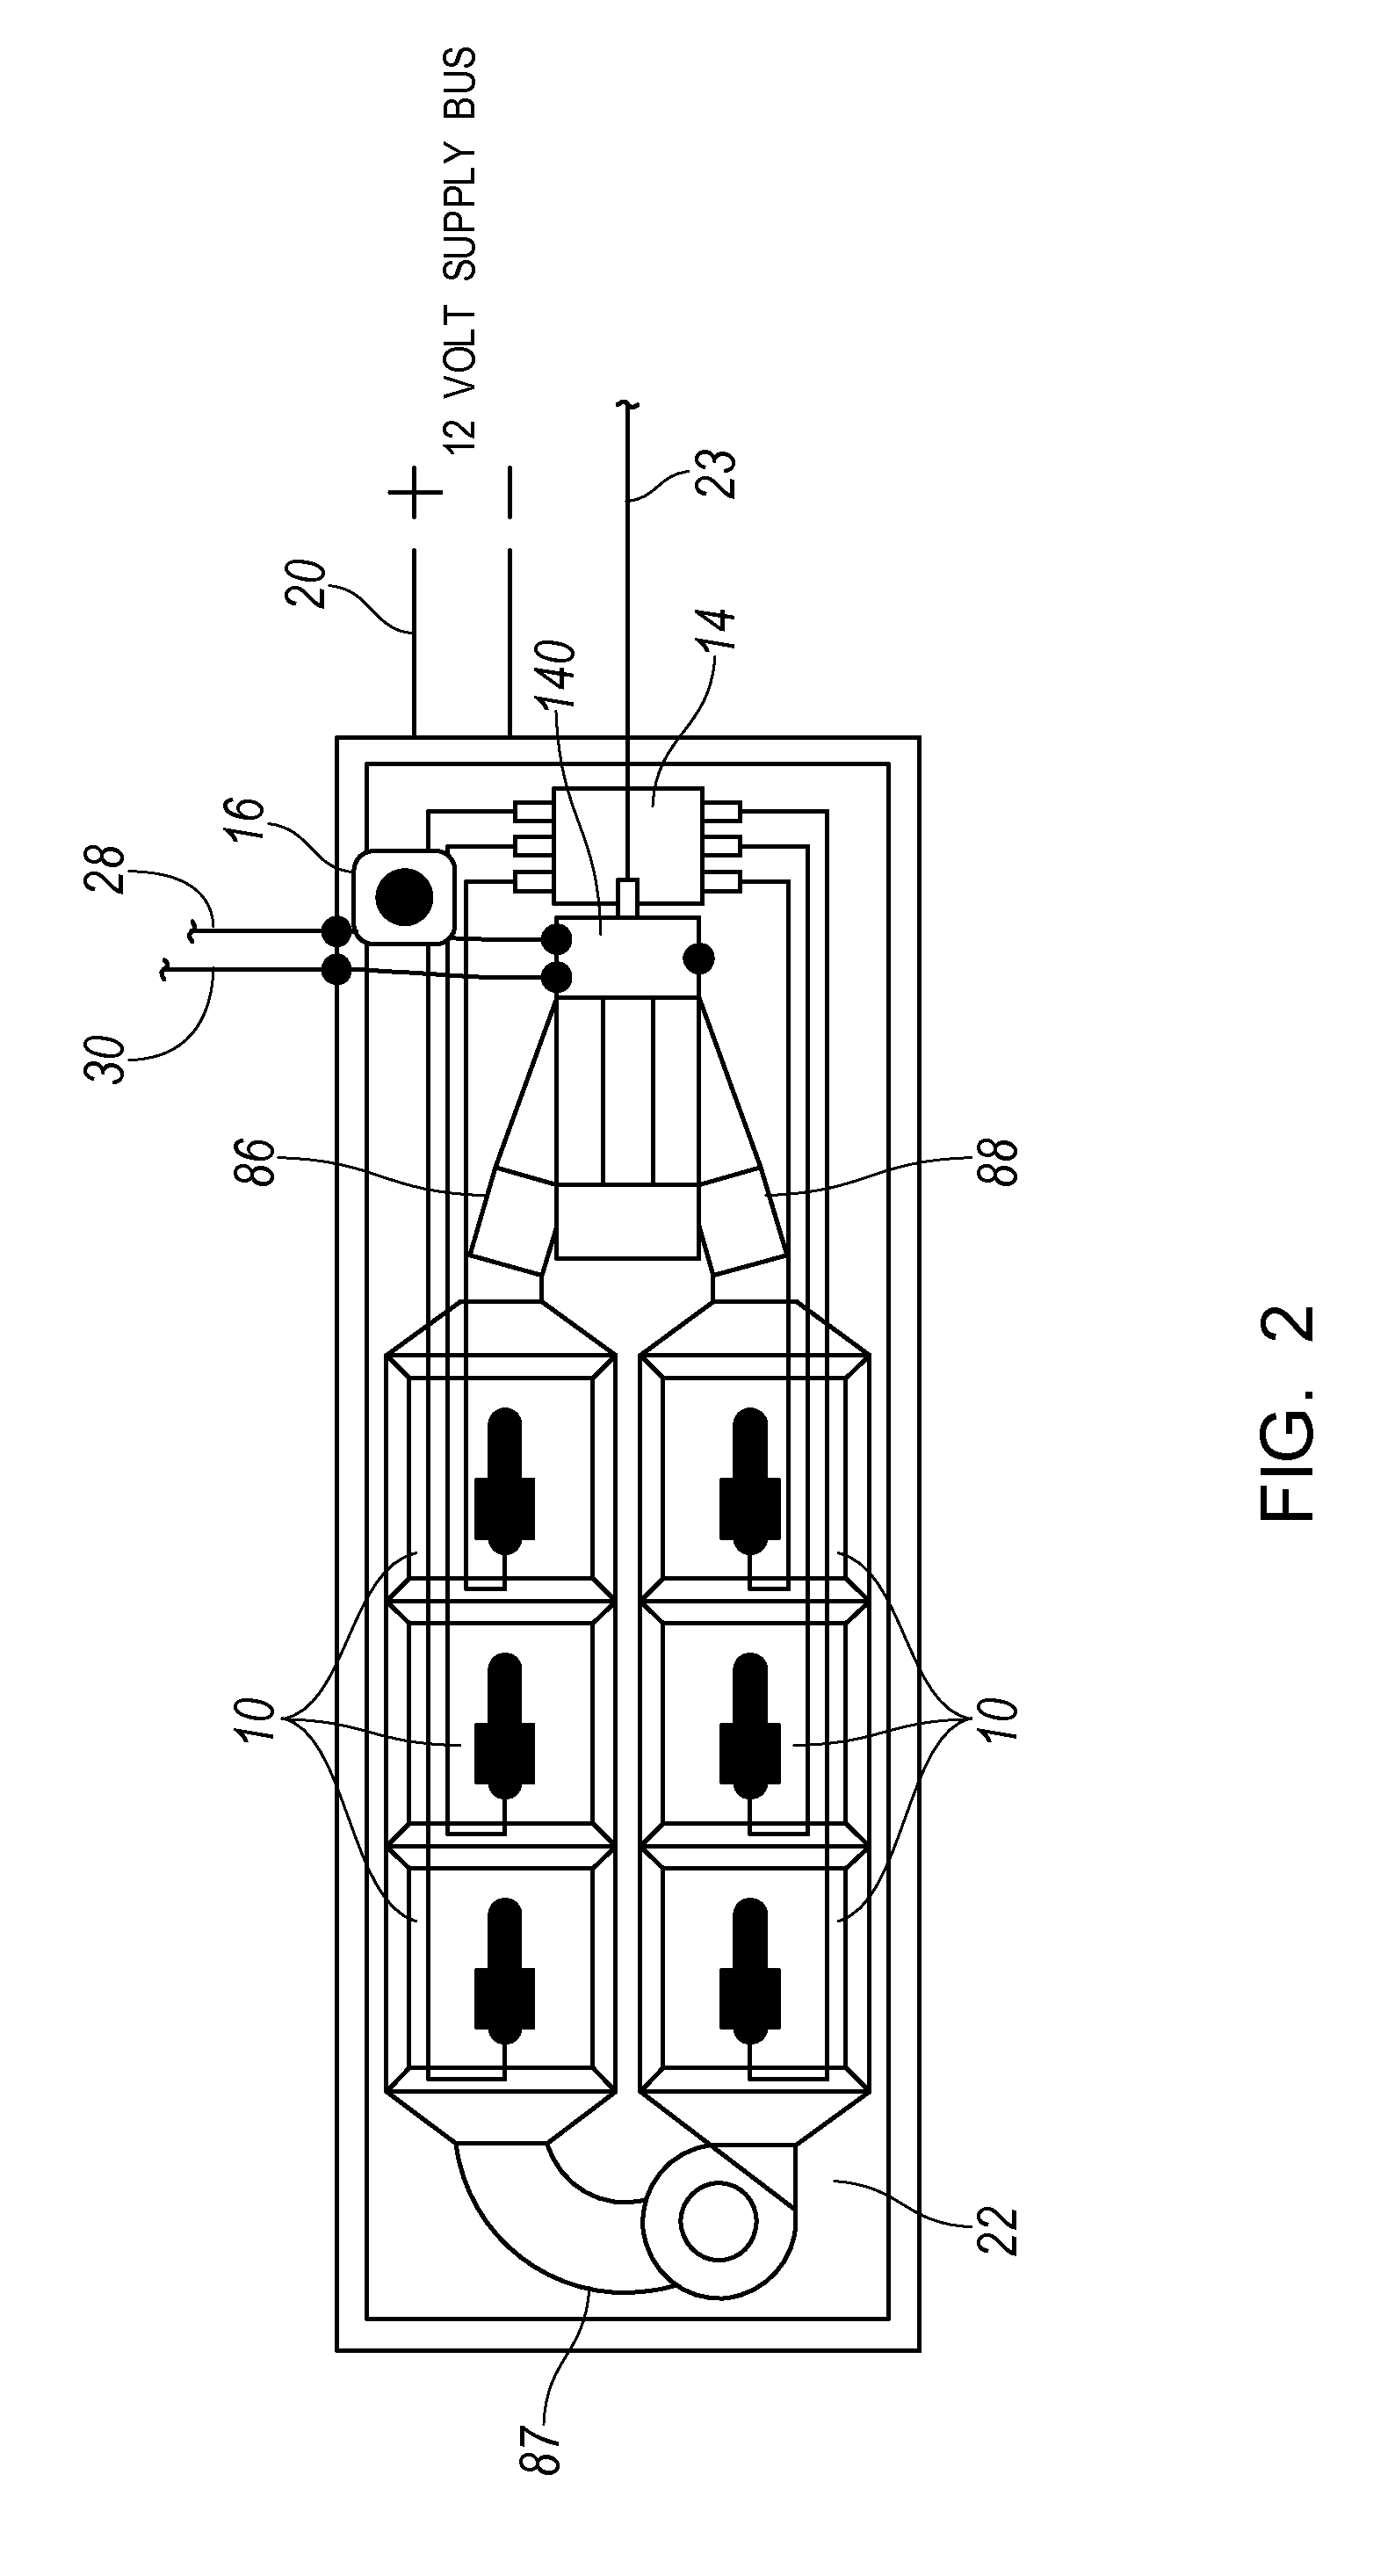 Temperature control of a vehicle battery